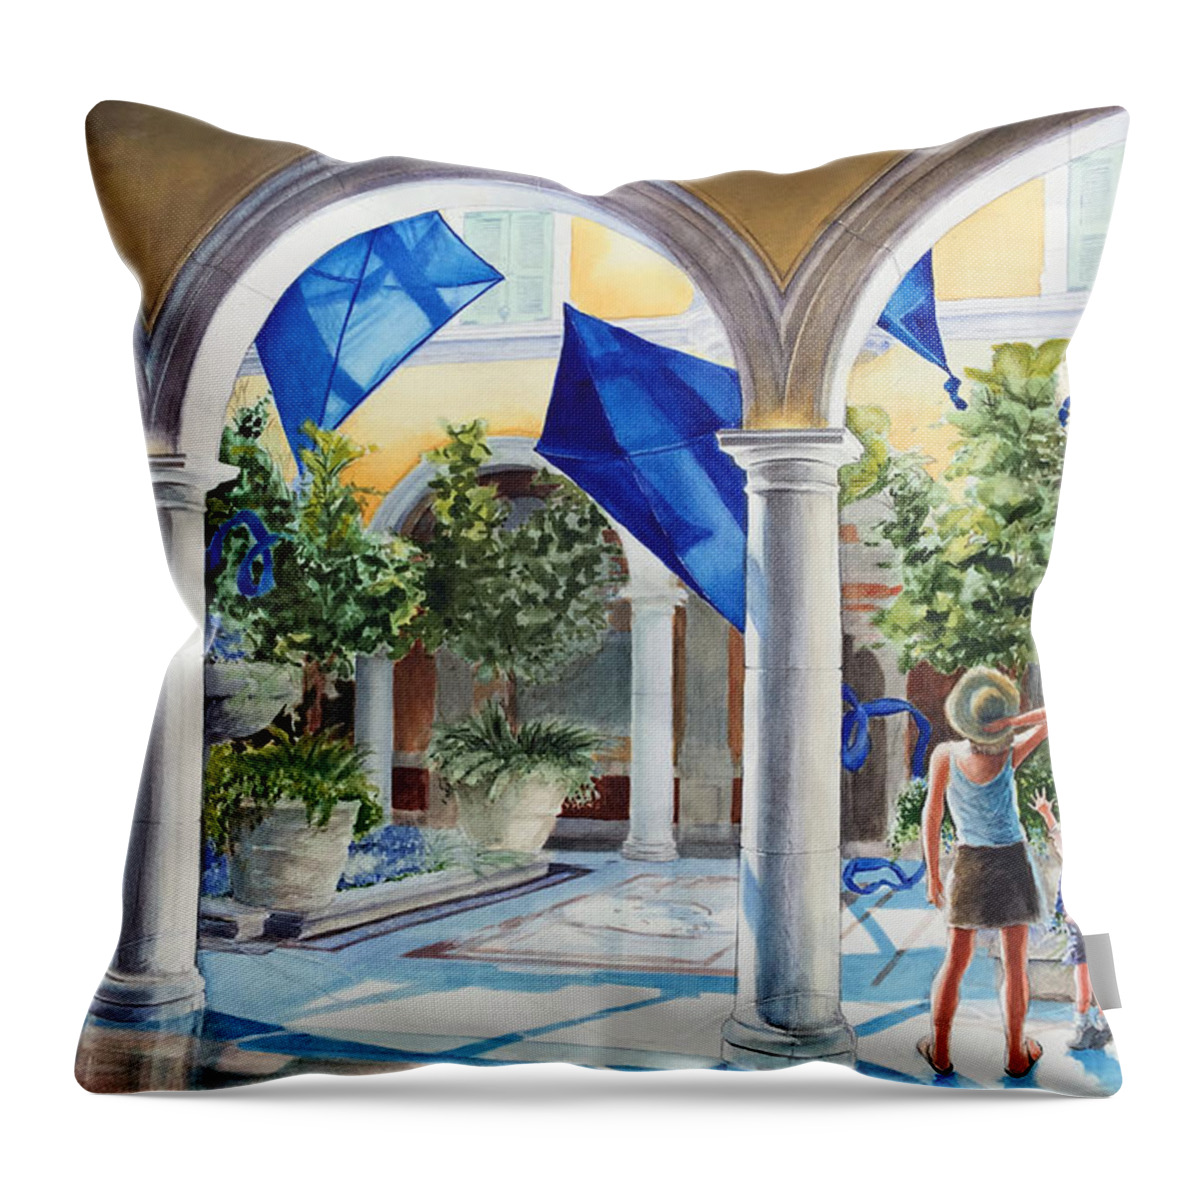 Art Throw Pillow featuring the painting Bellagio Kite Flight by Carolyn Coffey Wallace